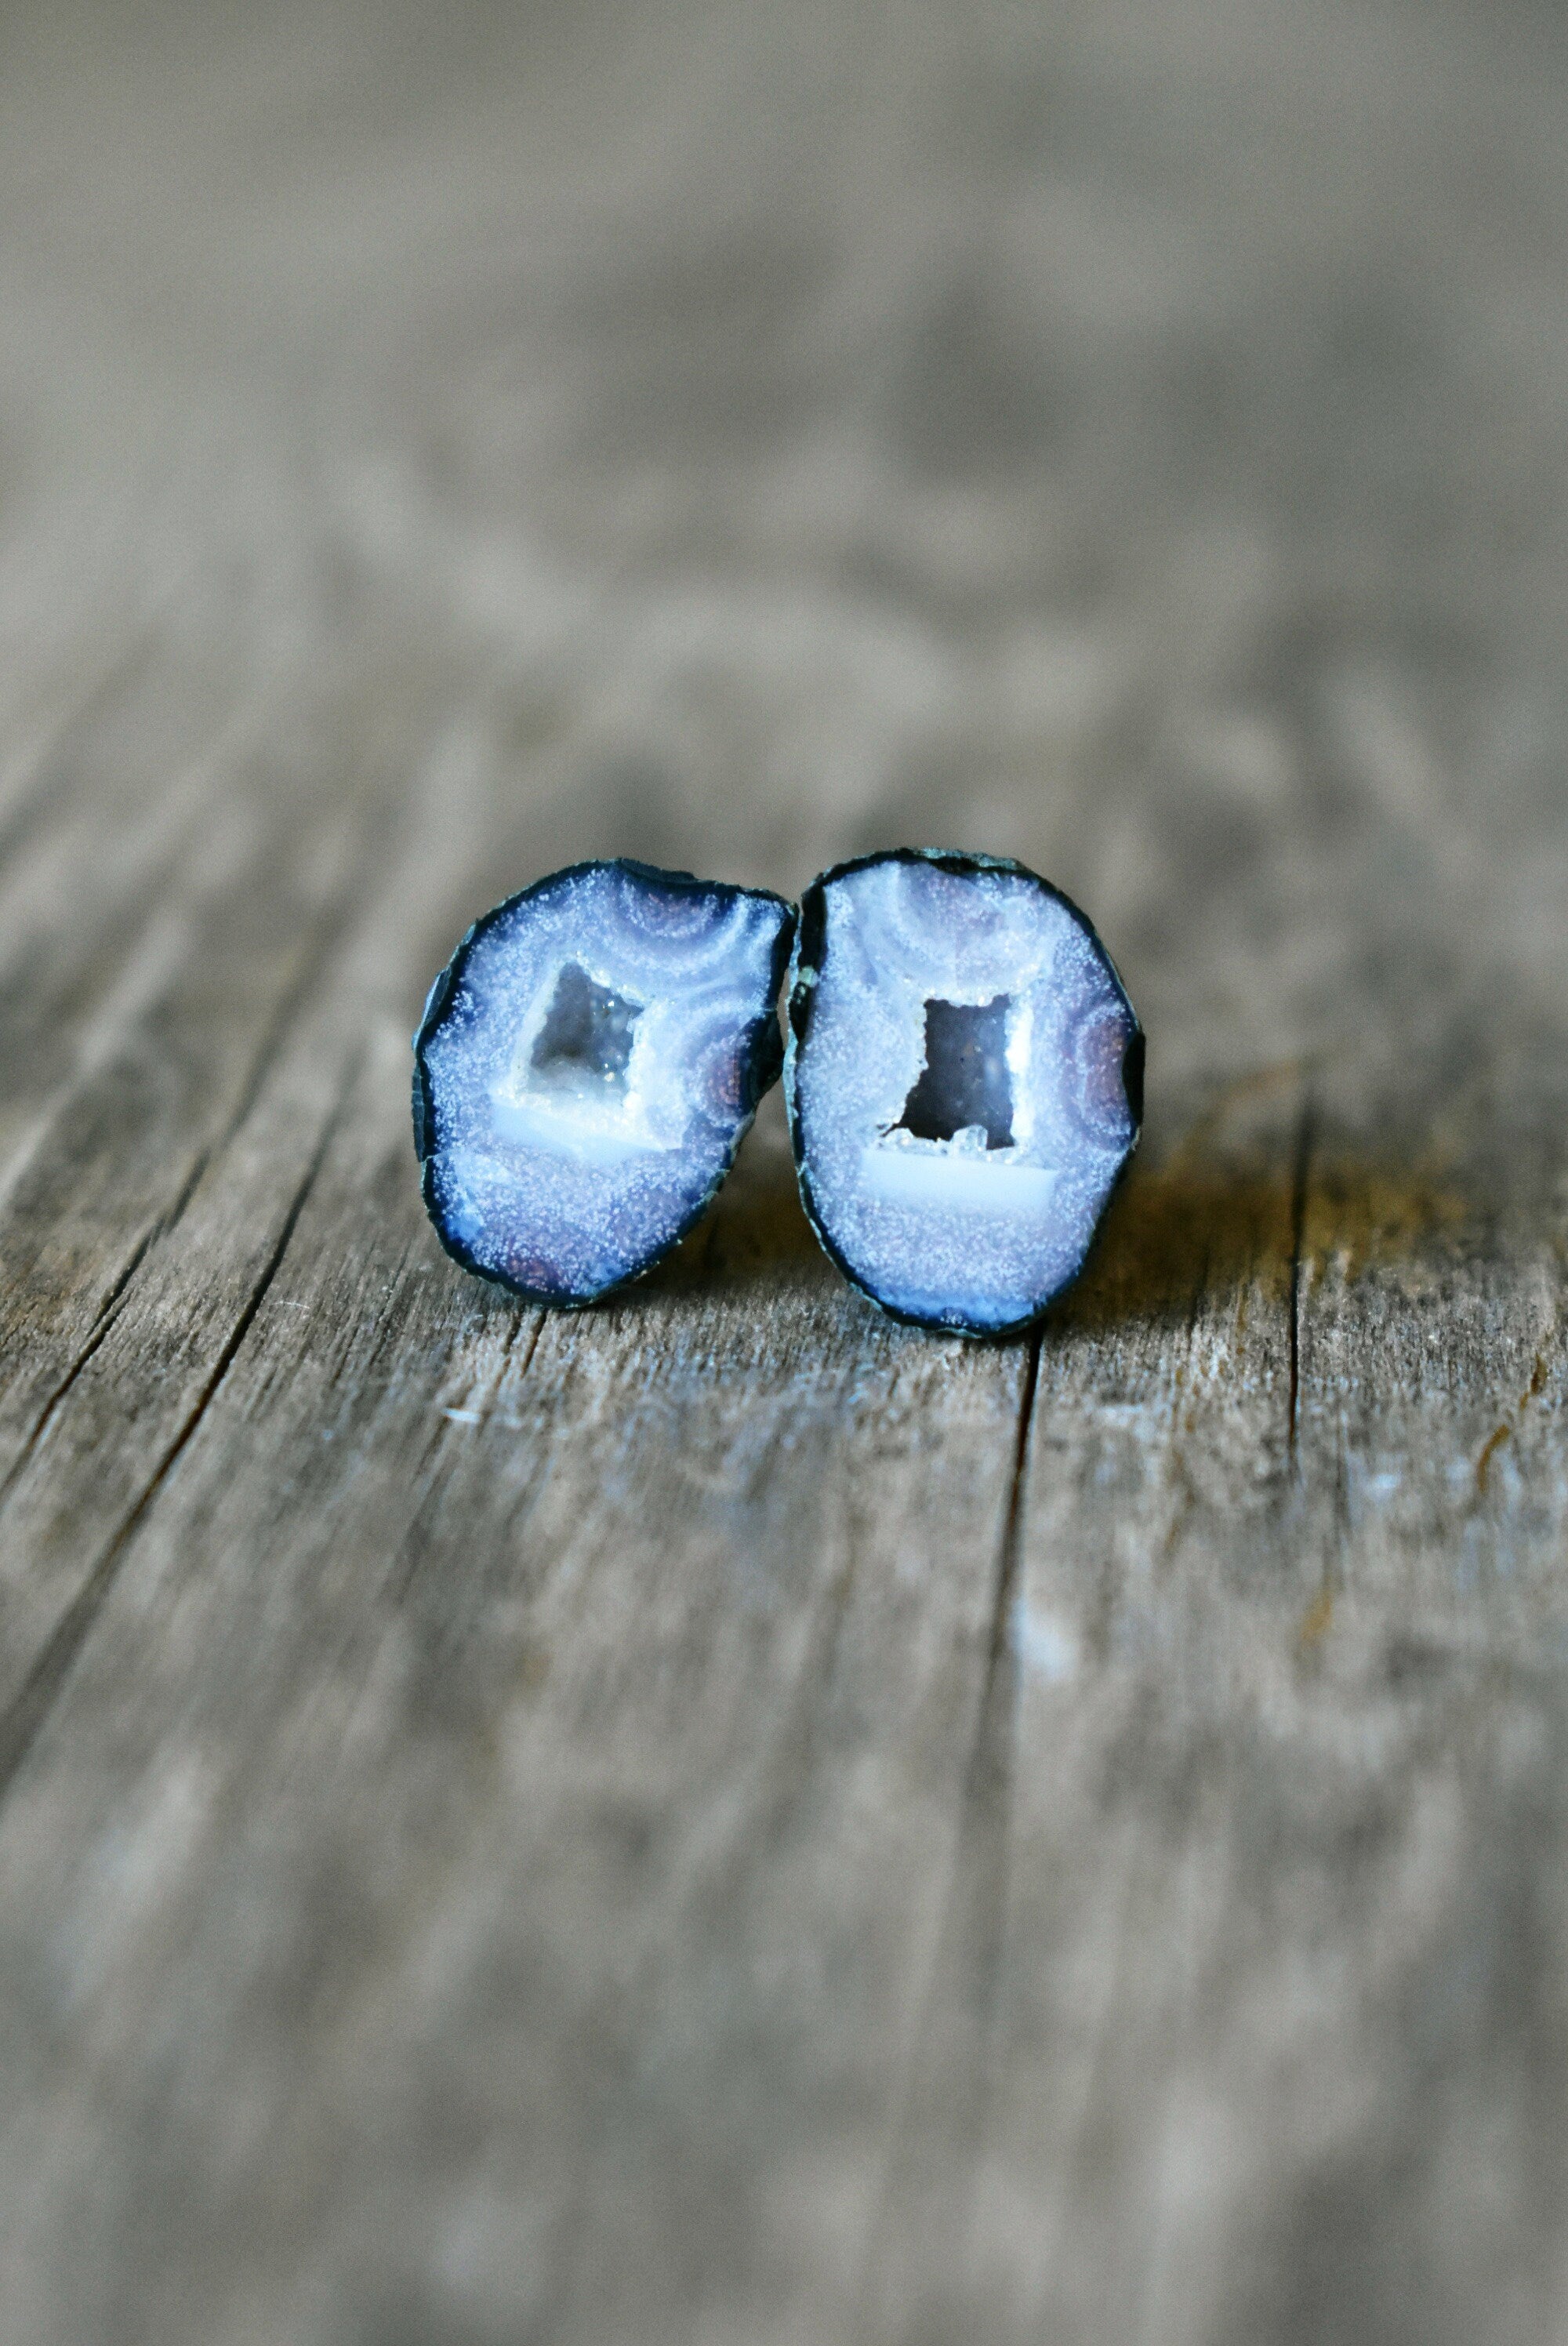 Unique Birthstone Jewelry, Pastel Crystal Earrings, Blue and Purple Baby Geode Crystal Stud Earrings, Tiny Raw Stone Earrings Rainbow Arch